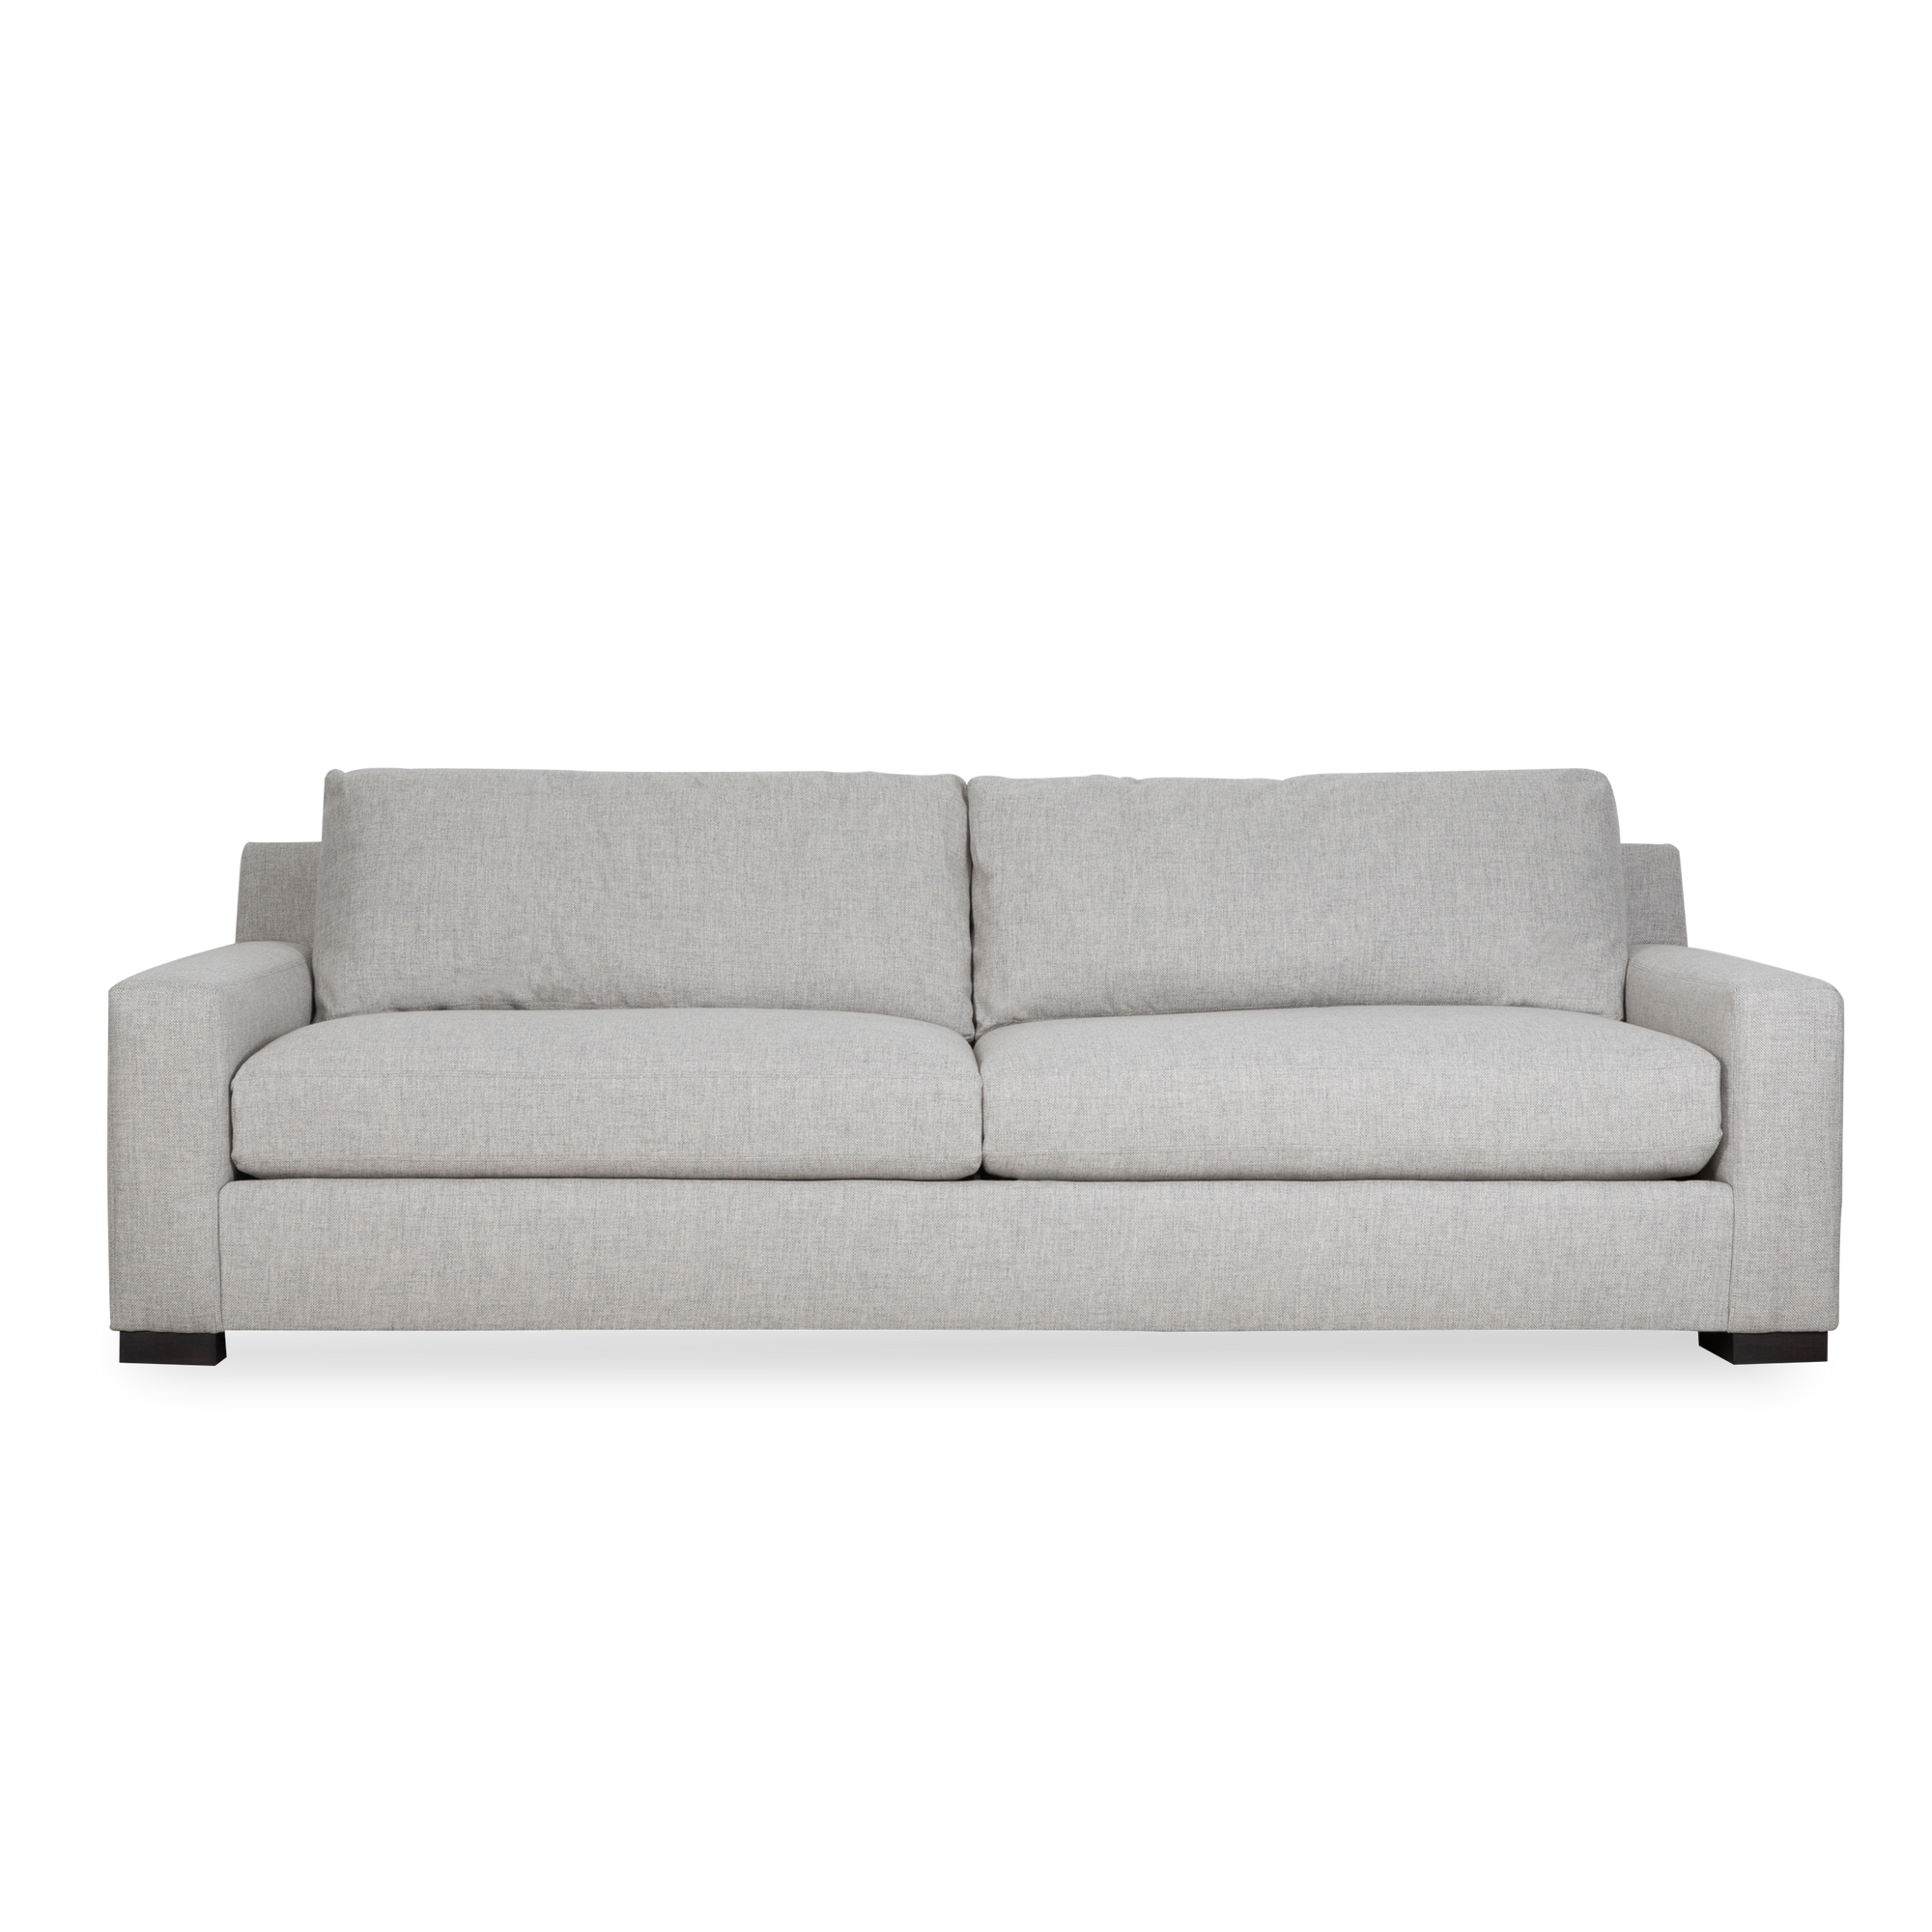 Contemporary yet retro, the Solana Sofa is a classic sofa with refined details.